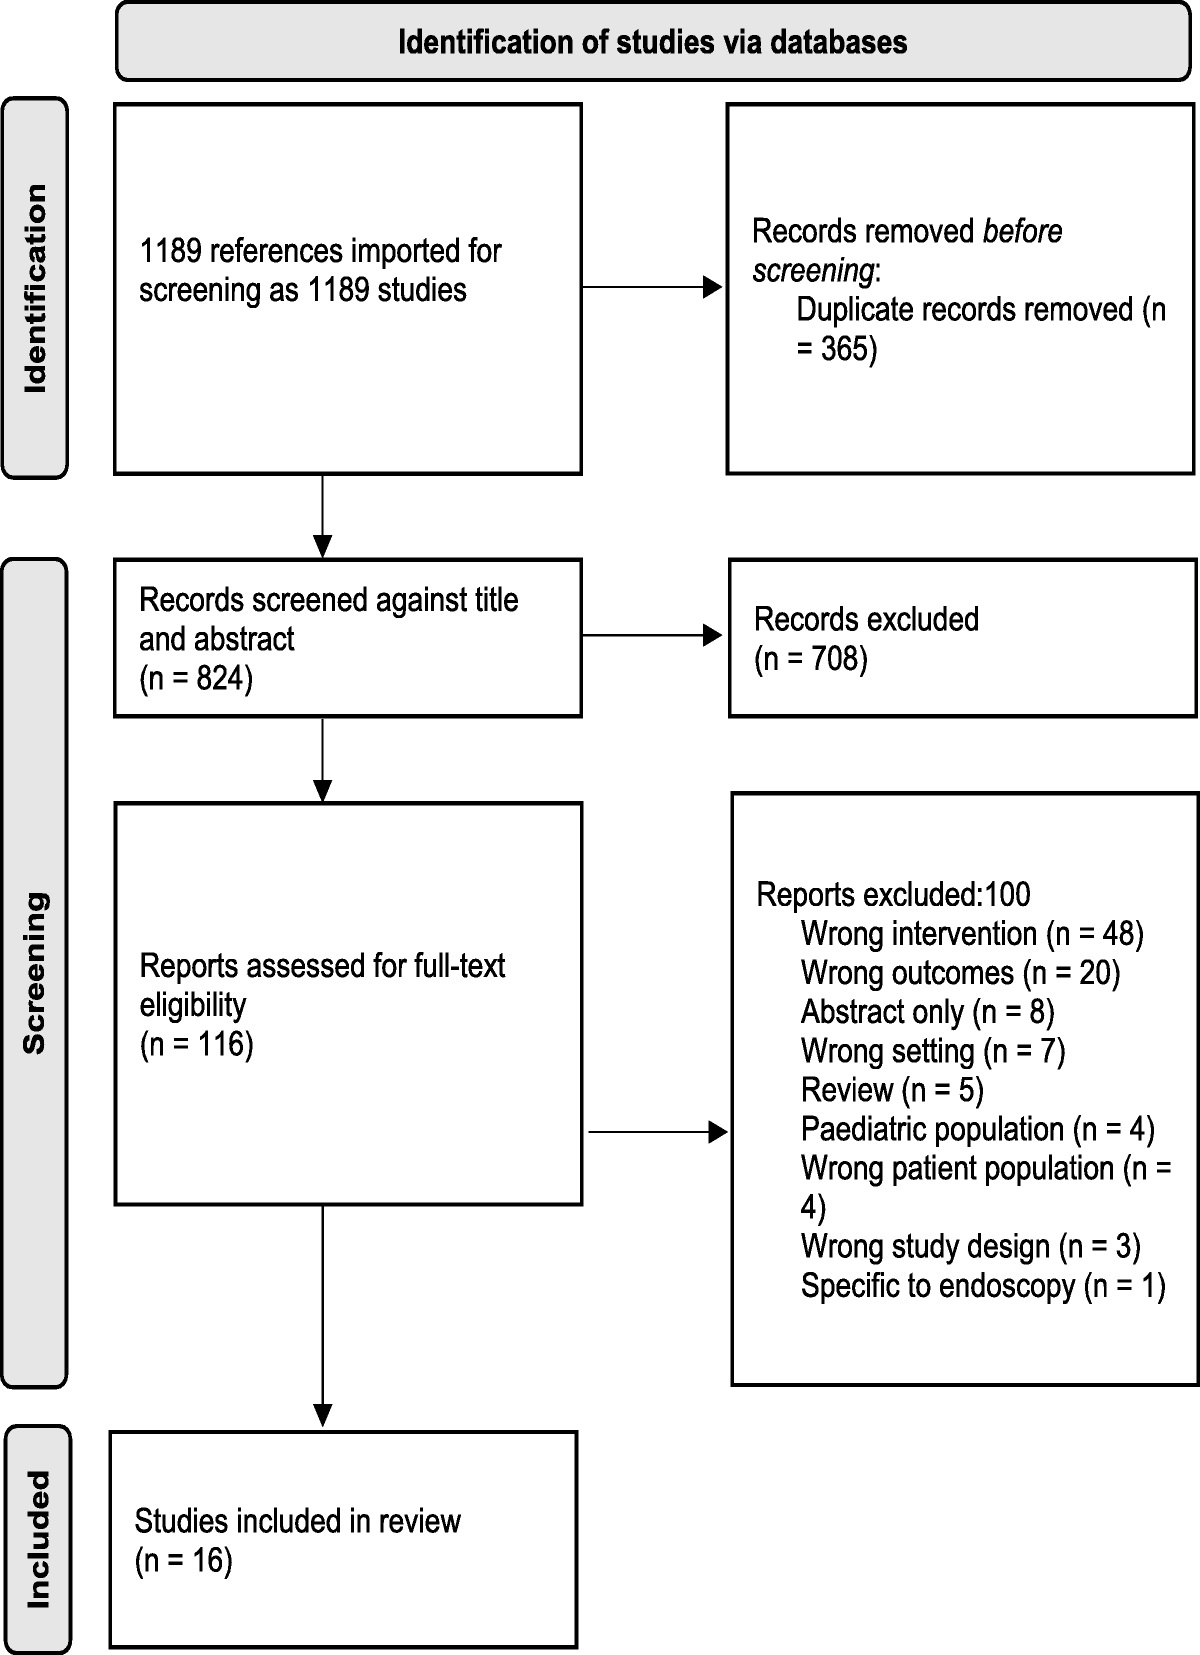 Systematic Review of Morbidity and Mortality Meeting Standardization: Does It Lead to Improved Professional Development, System Improvements, Clinician Engagement, and Enhanced Patient Safety Culture?